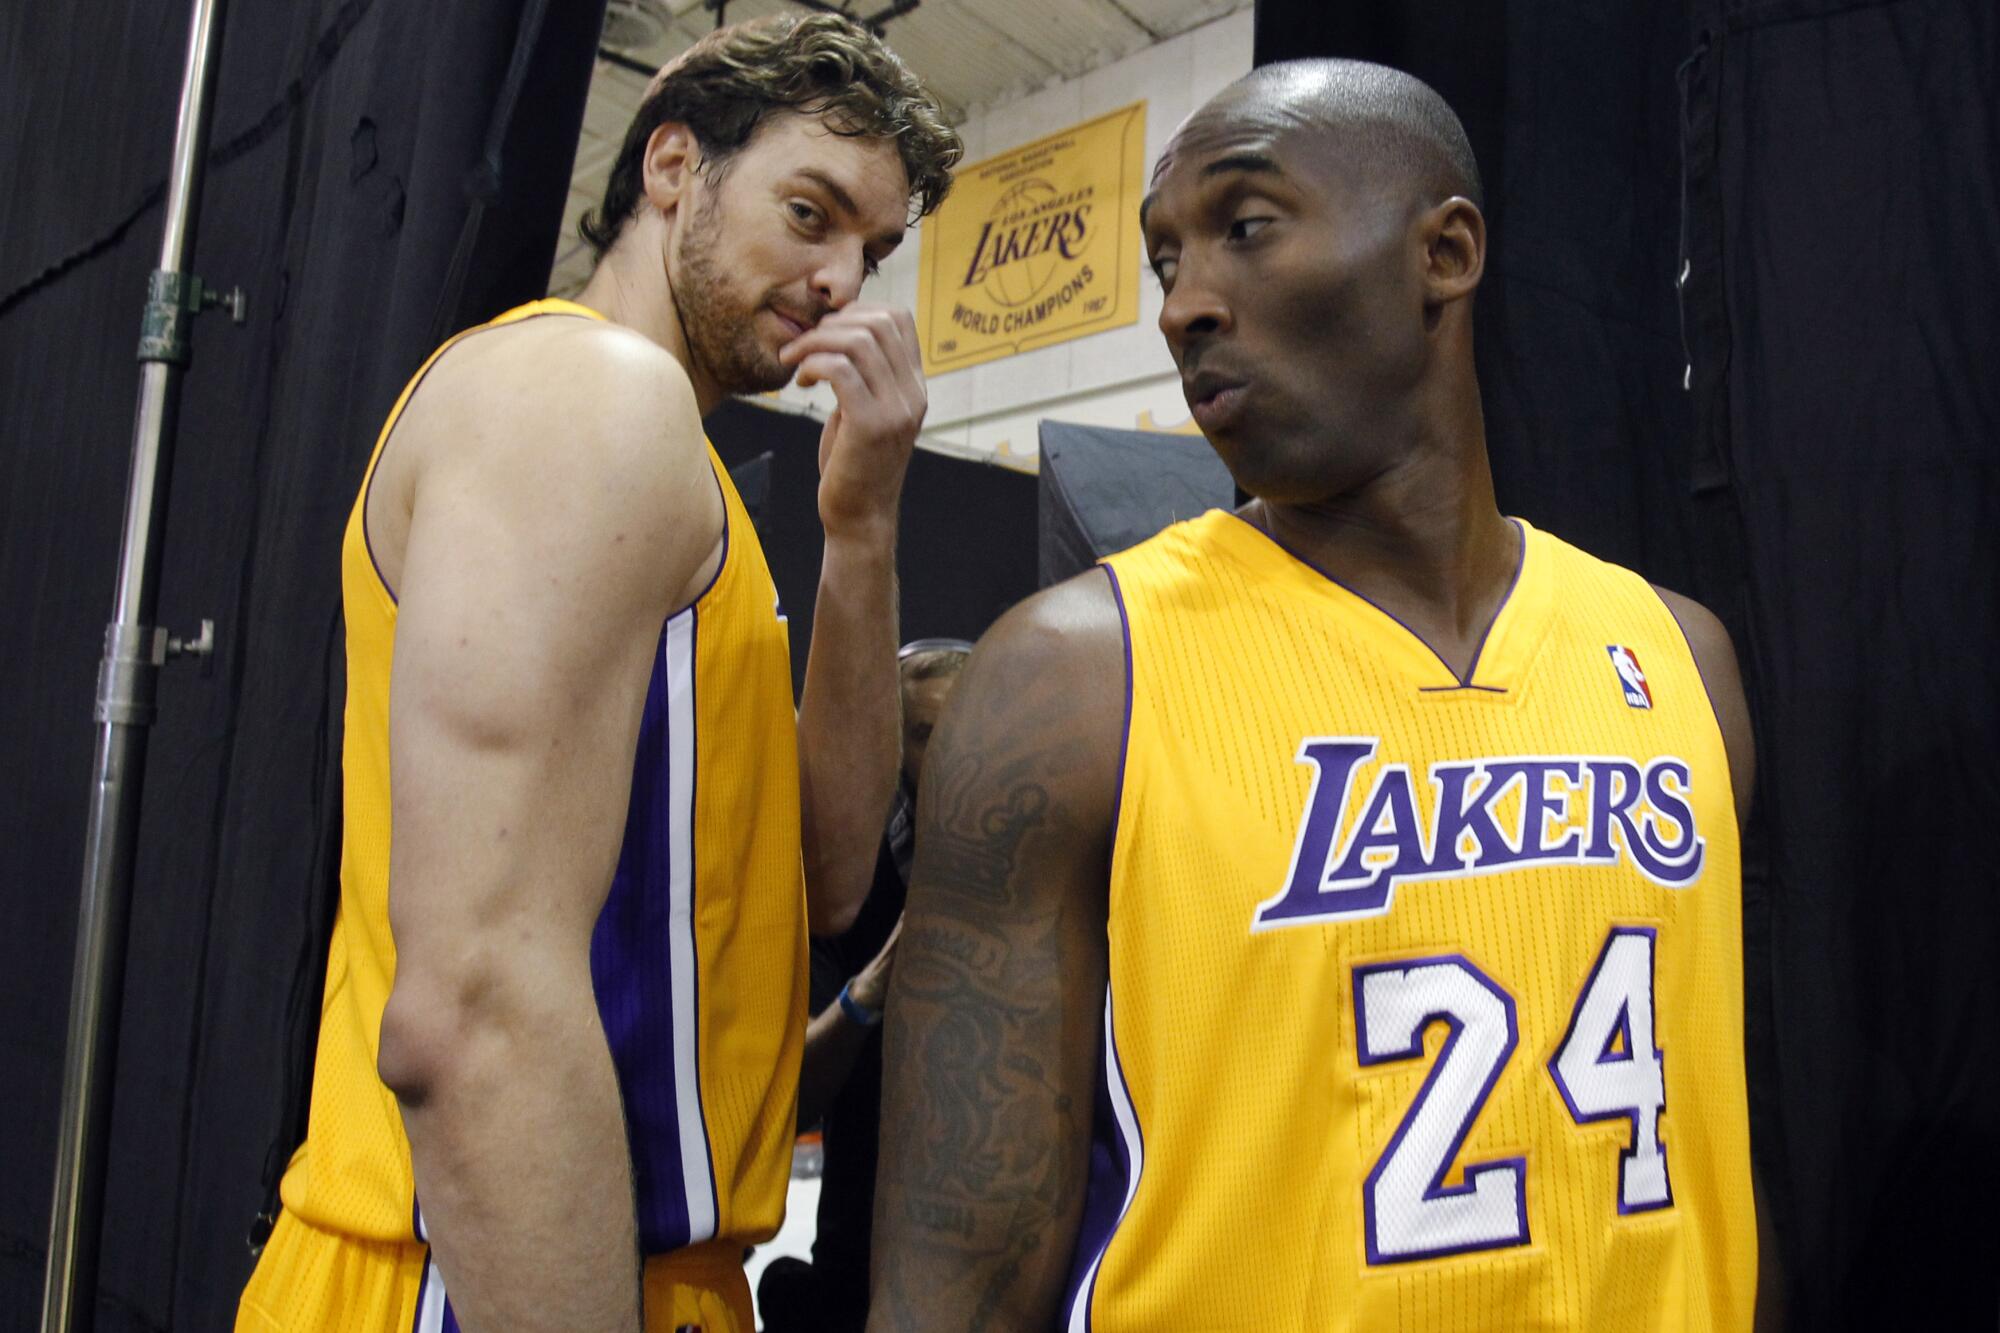 Los Angeles Lakers forward Pau Gasol, left, of Spain, stands with guard Kobe Bryant, right.